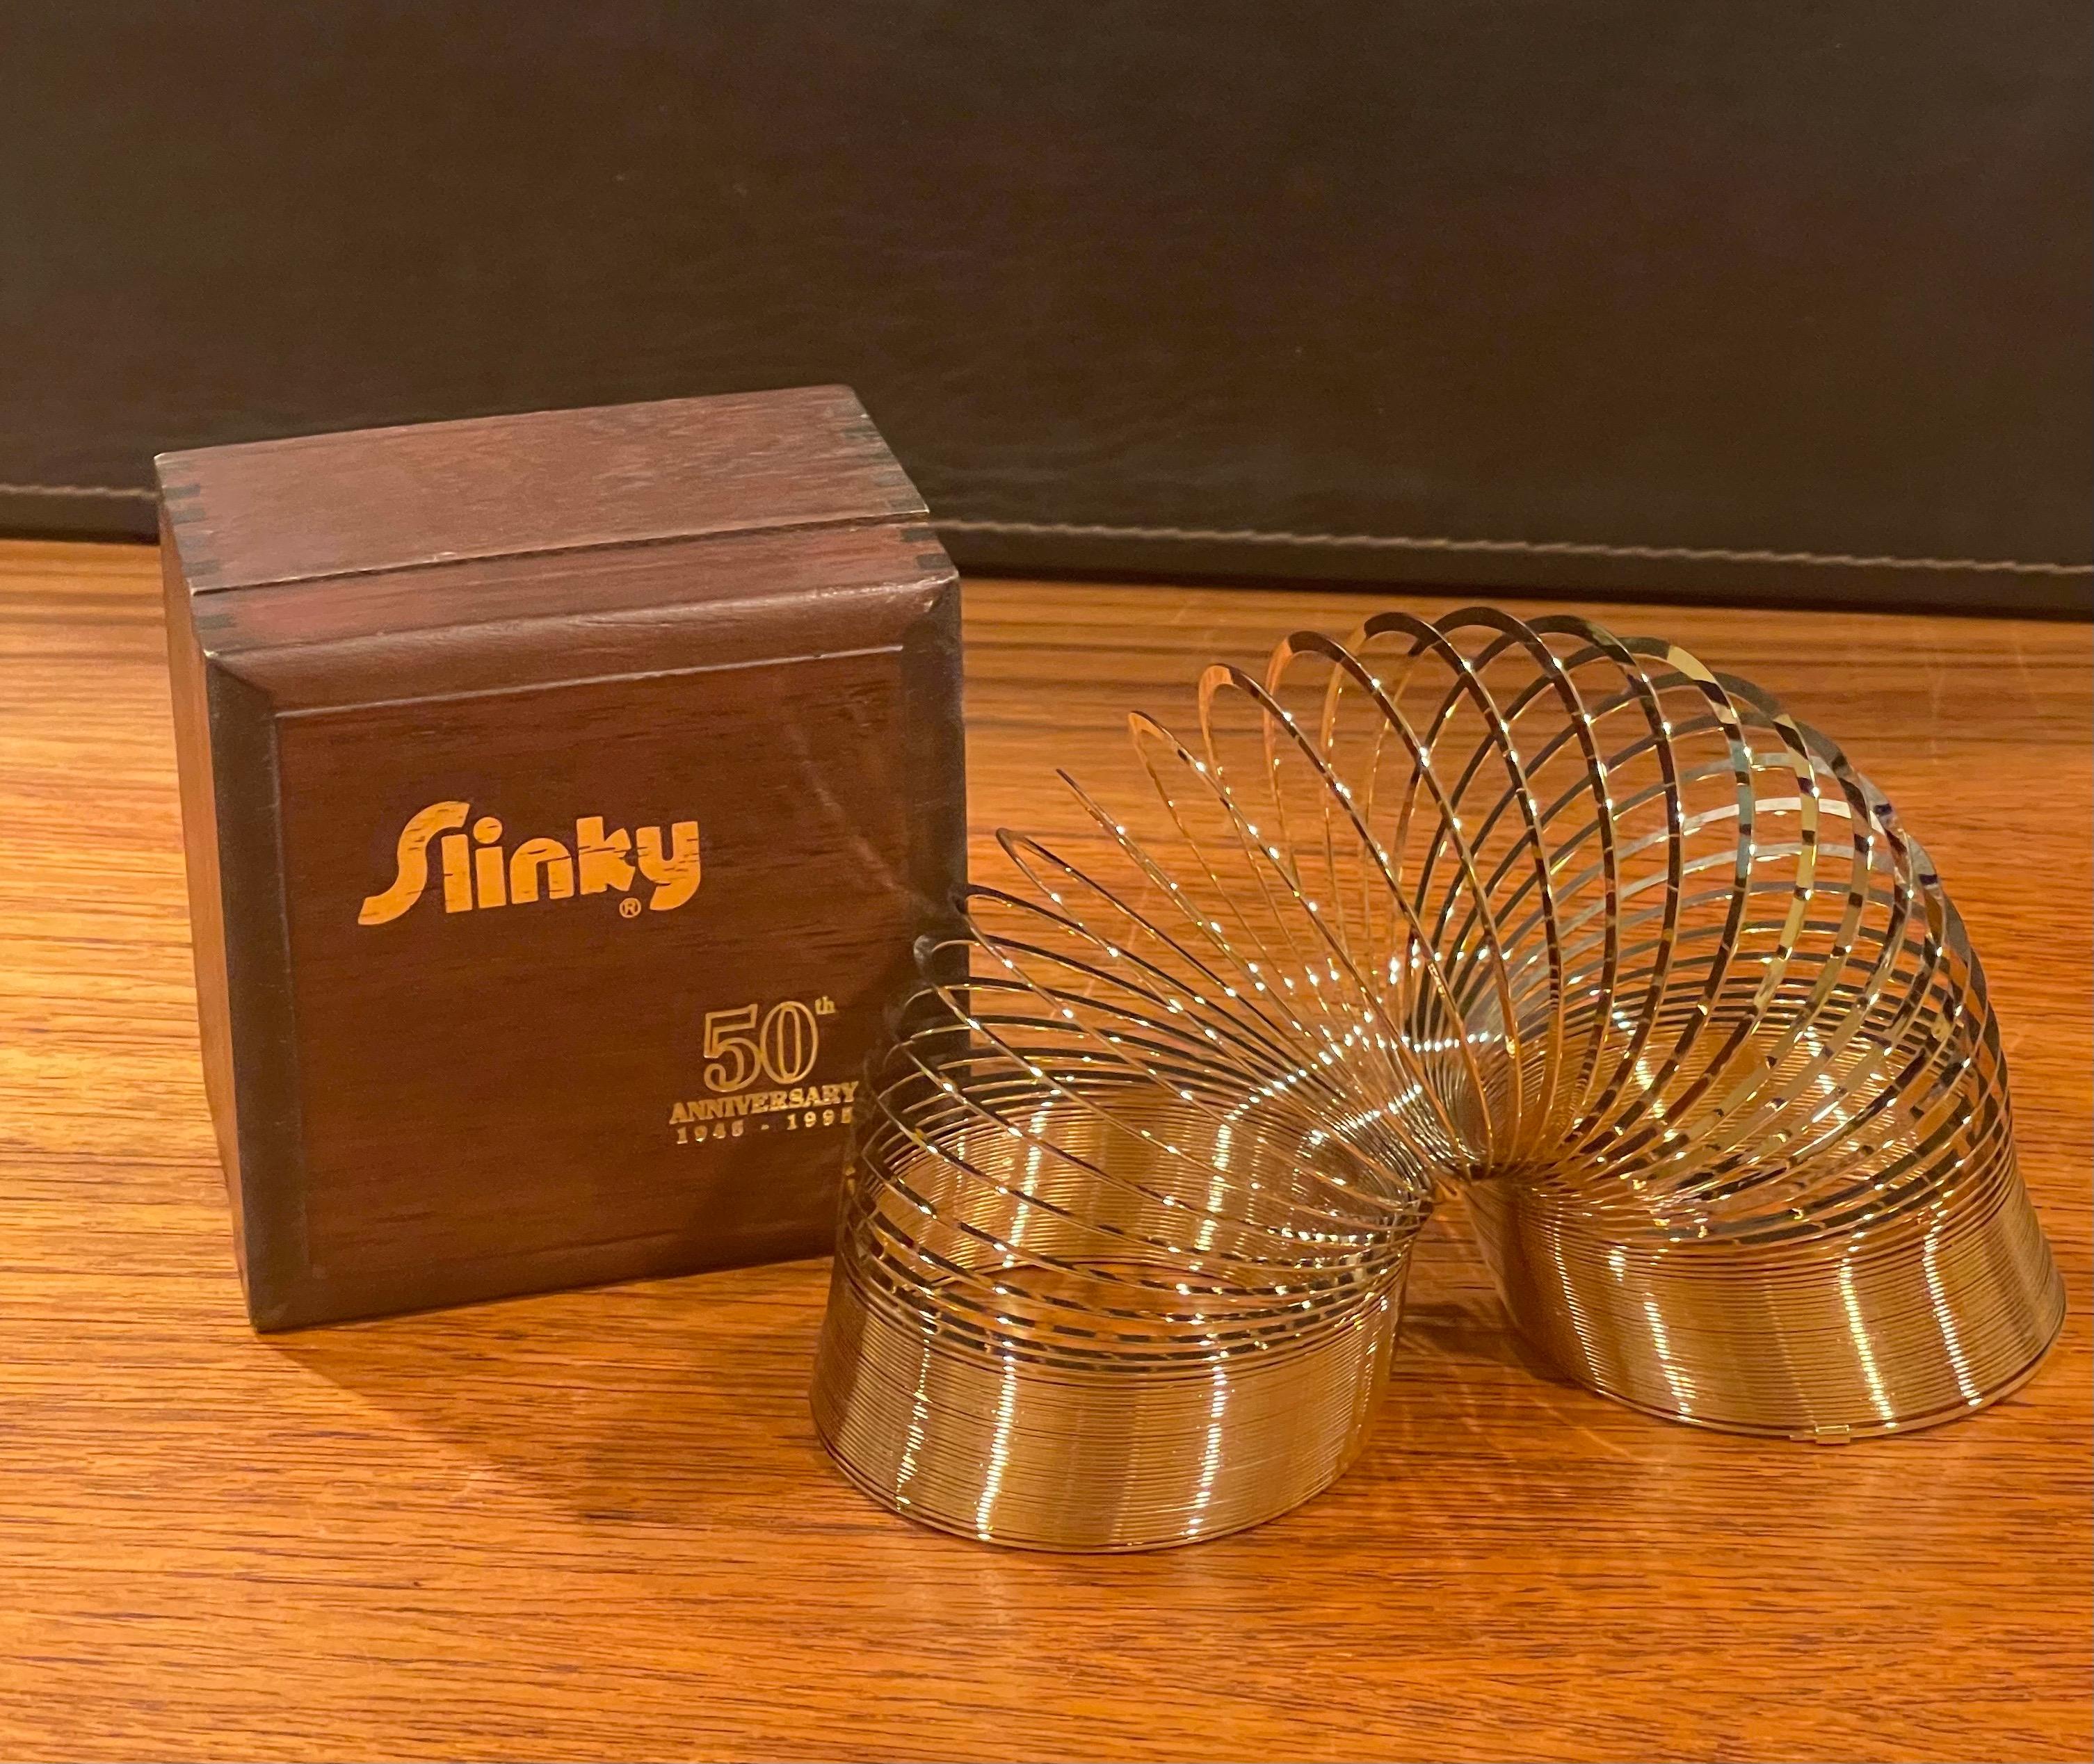 Gold Plate 50th Anniversary Gold-Plated Slinky Toy in Wood Box